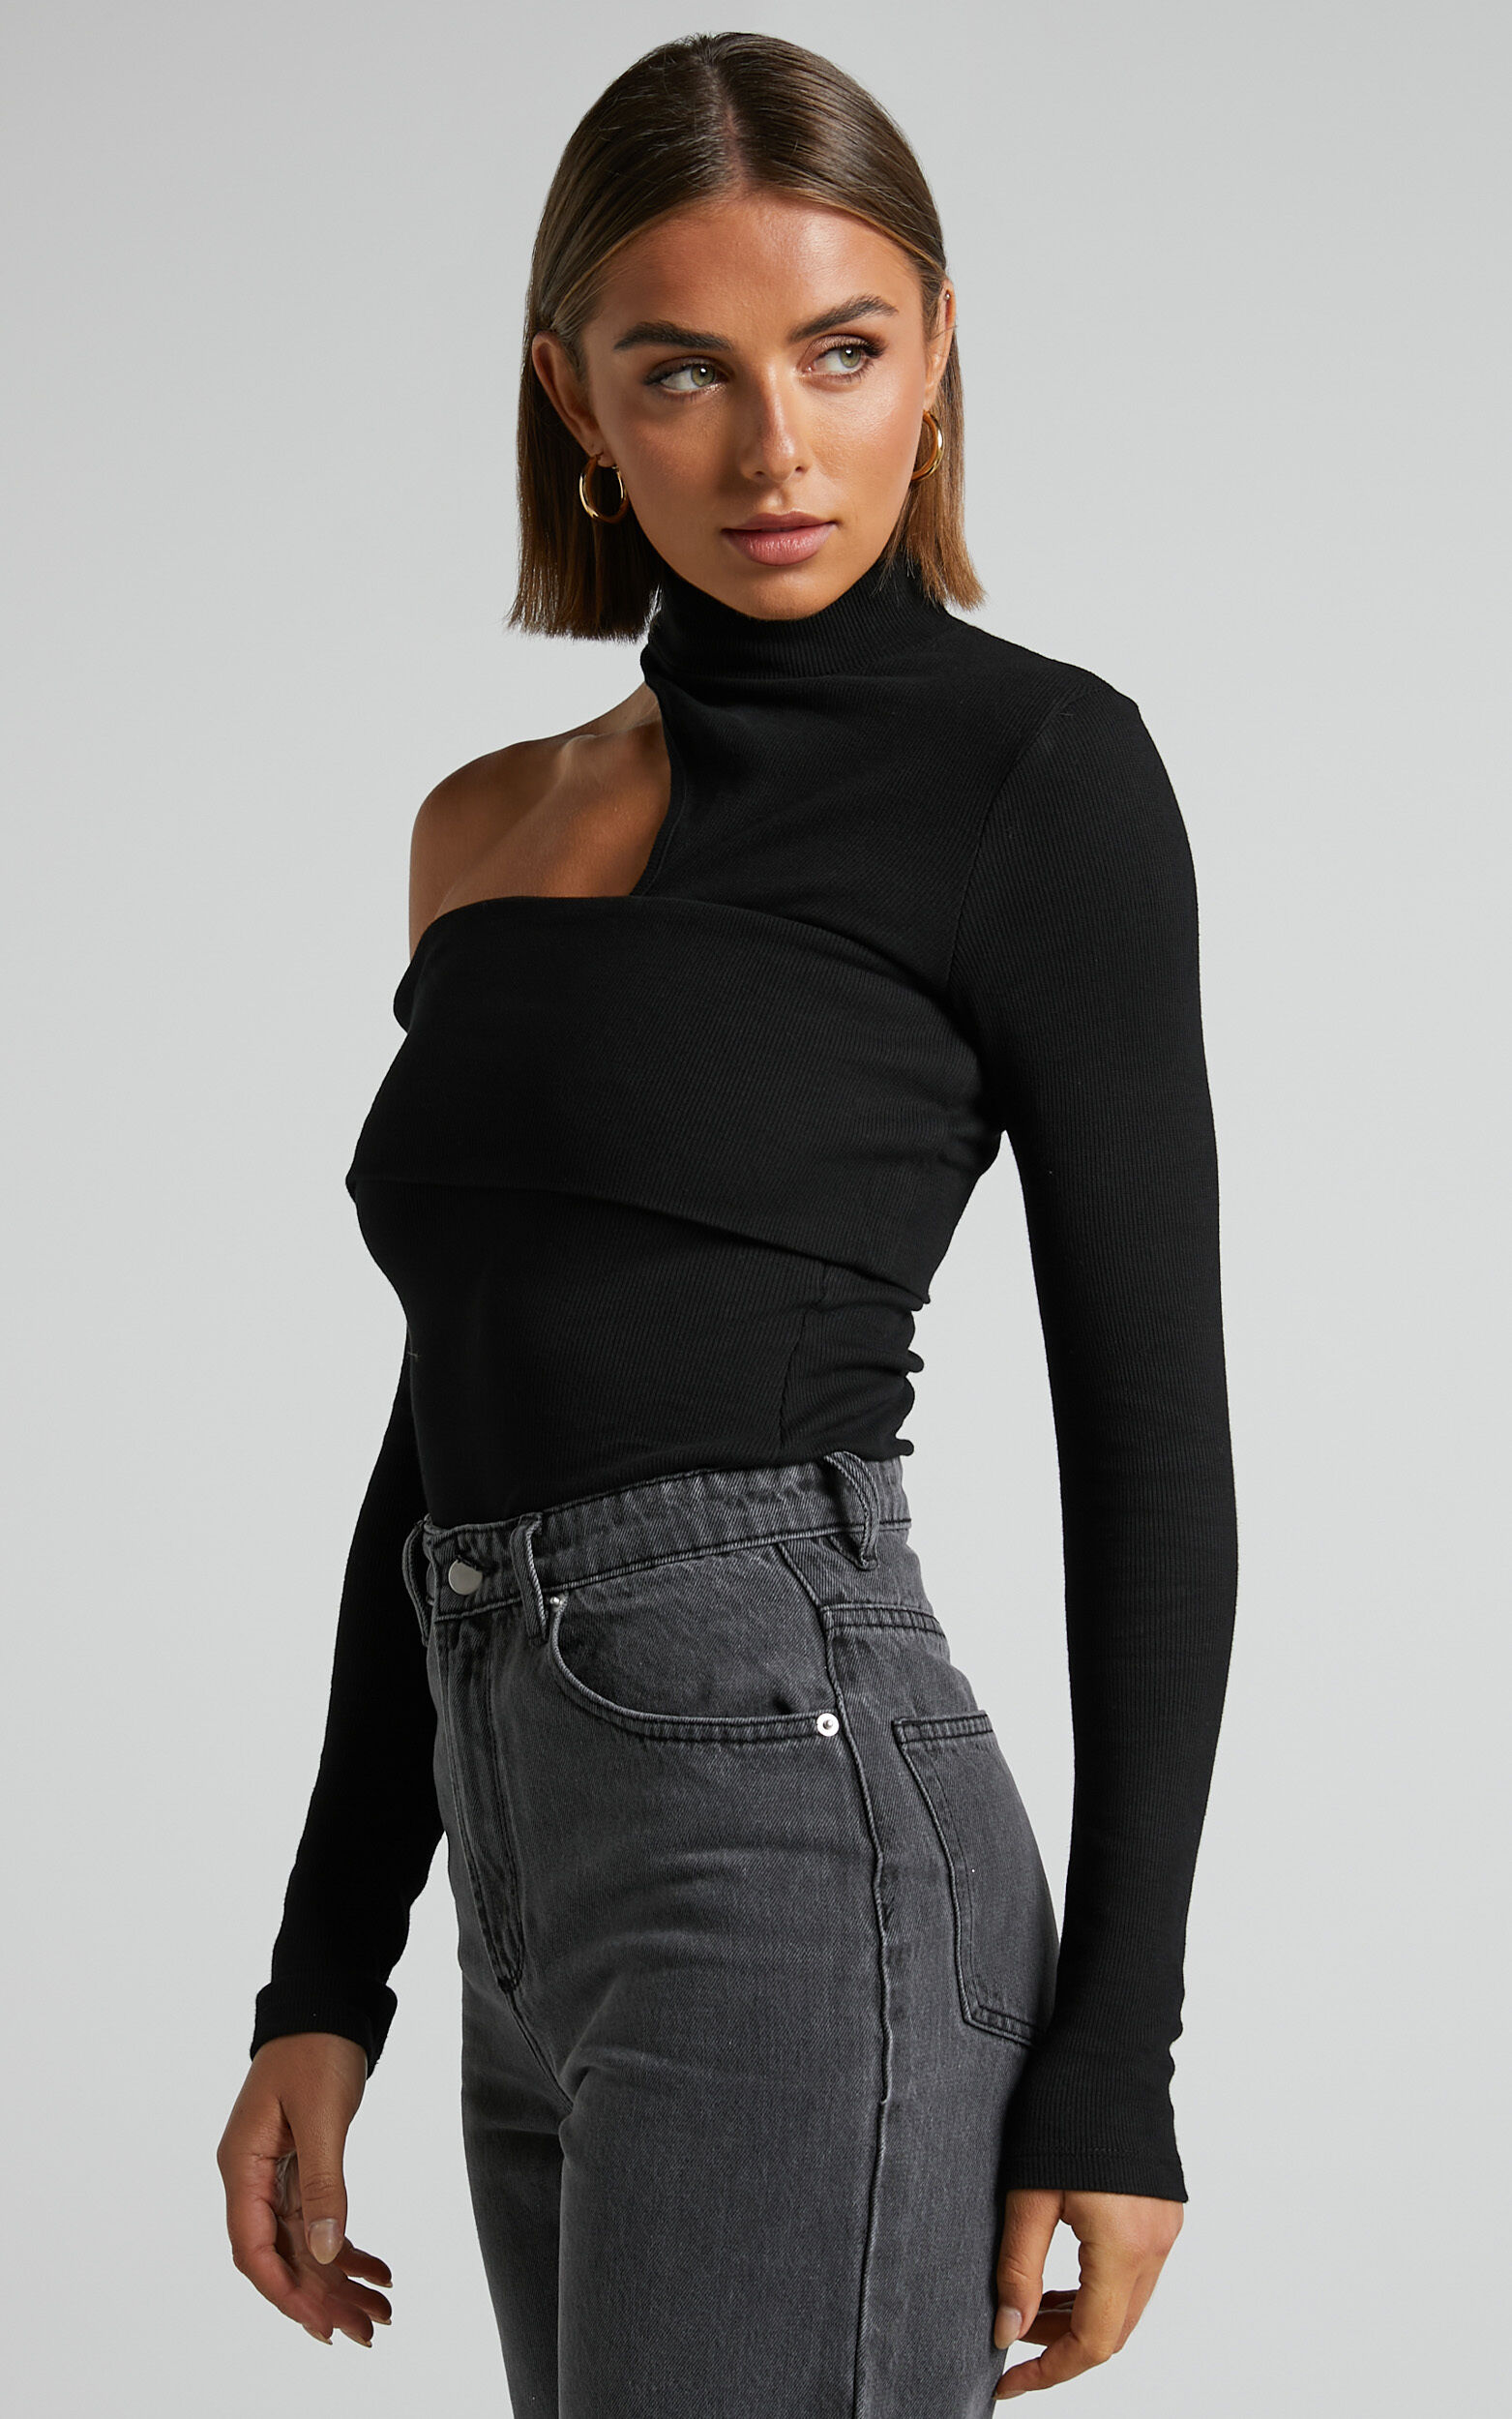 Long Sleeve Cutout Crop Top  Crop tops, Classy jumpsuit outfits, Crop top  outfits